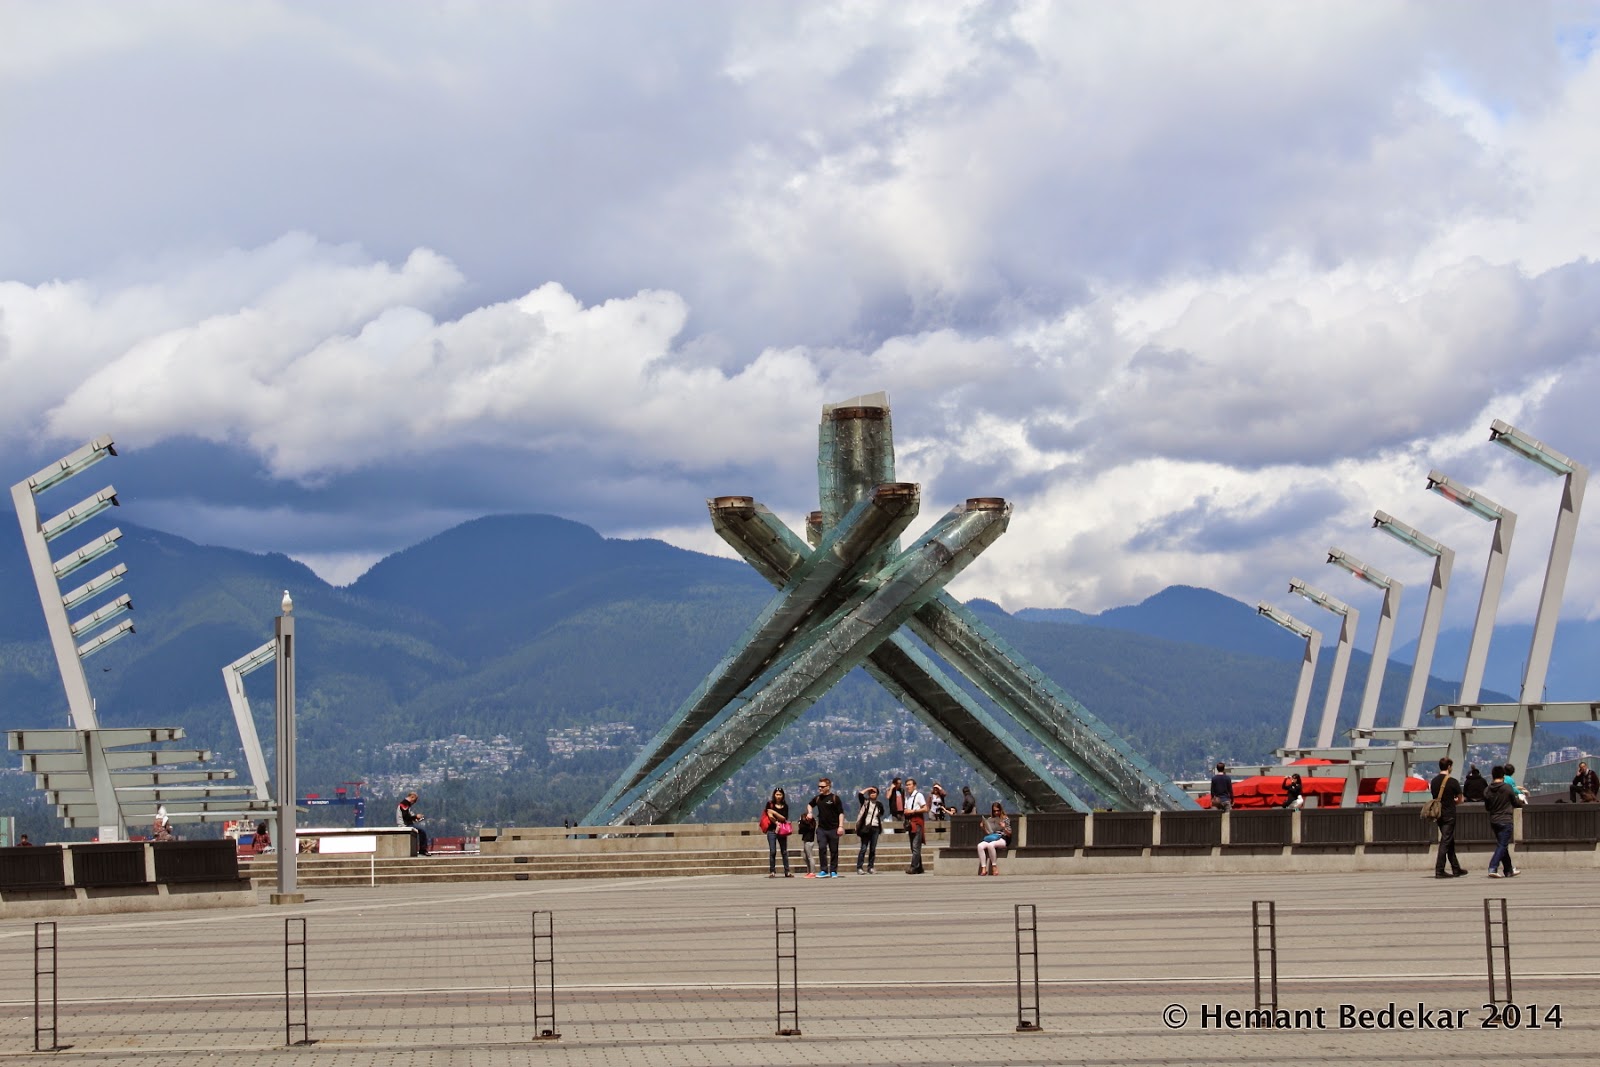 Vancouver Winter Olympics 2010 Cauldron in Coal Harbour